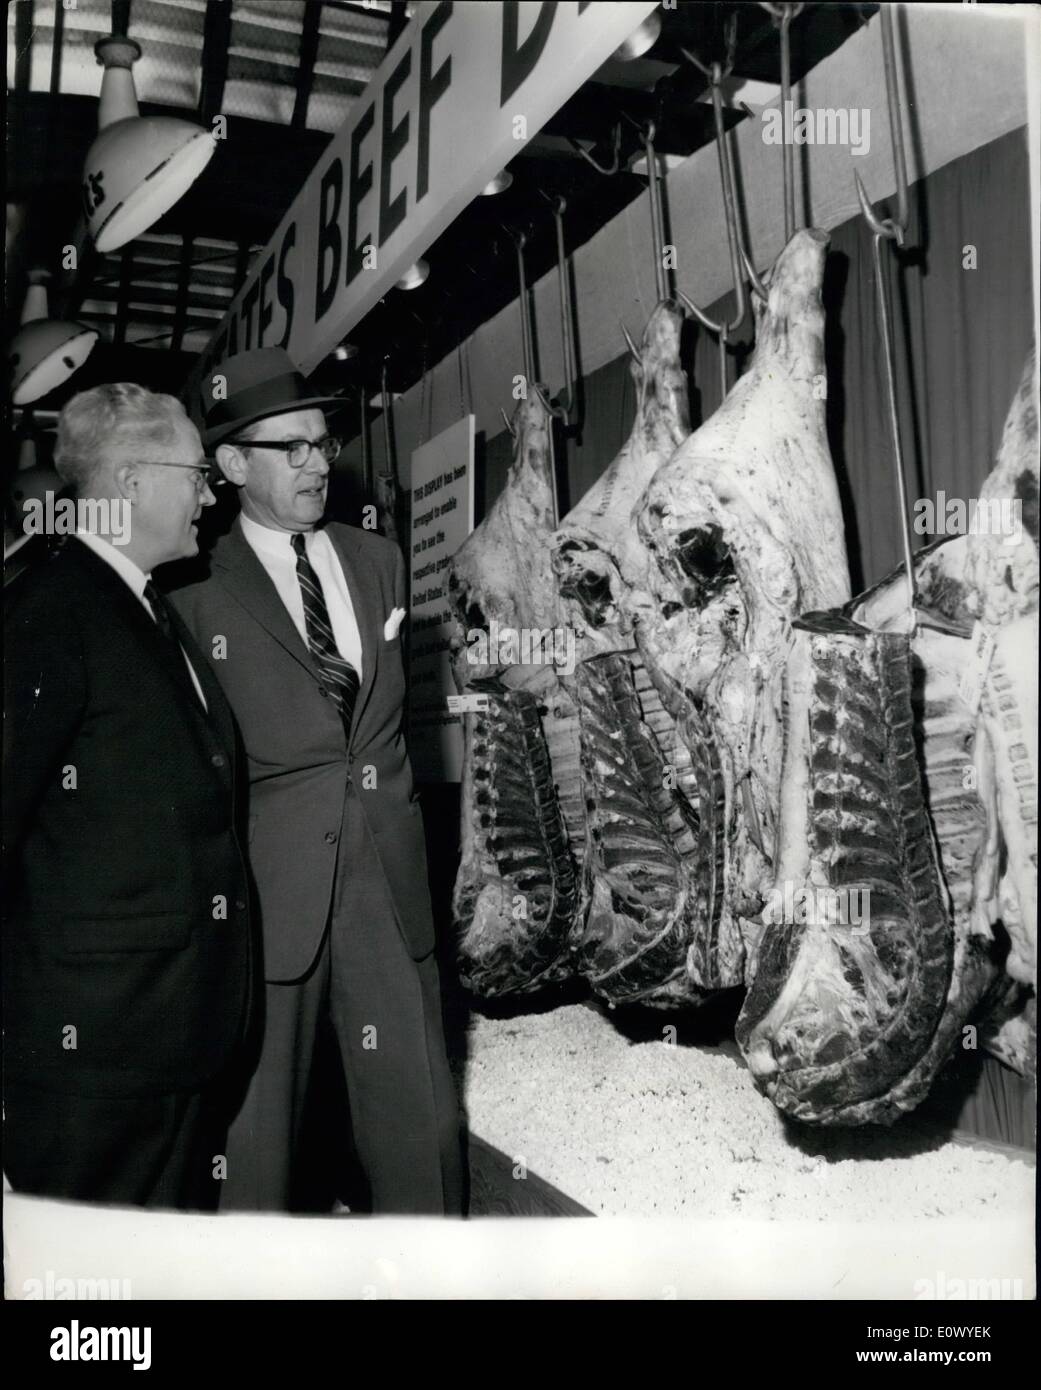 Jun. 16, 1964 - 16-6-64 American beef on show at Smithfield. A cargo of 46 quarters of United States chilled beef weighing 7,000 lbs. has been shipped from America to be exhibited by the U.S. Department of Agriculture and the American Meat Institute at London's Smithfield meat market in an effort to develop new markets for American products. Photo Shows: Mr. W.M. Justice (left) a director of British grocery chain Sainsburys, and buyer Mr. Bob Wallis seen examining some of the American beef on show at Smithfield this morning. Stock Photo